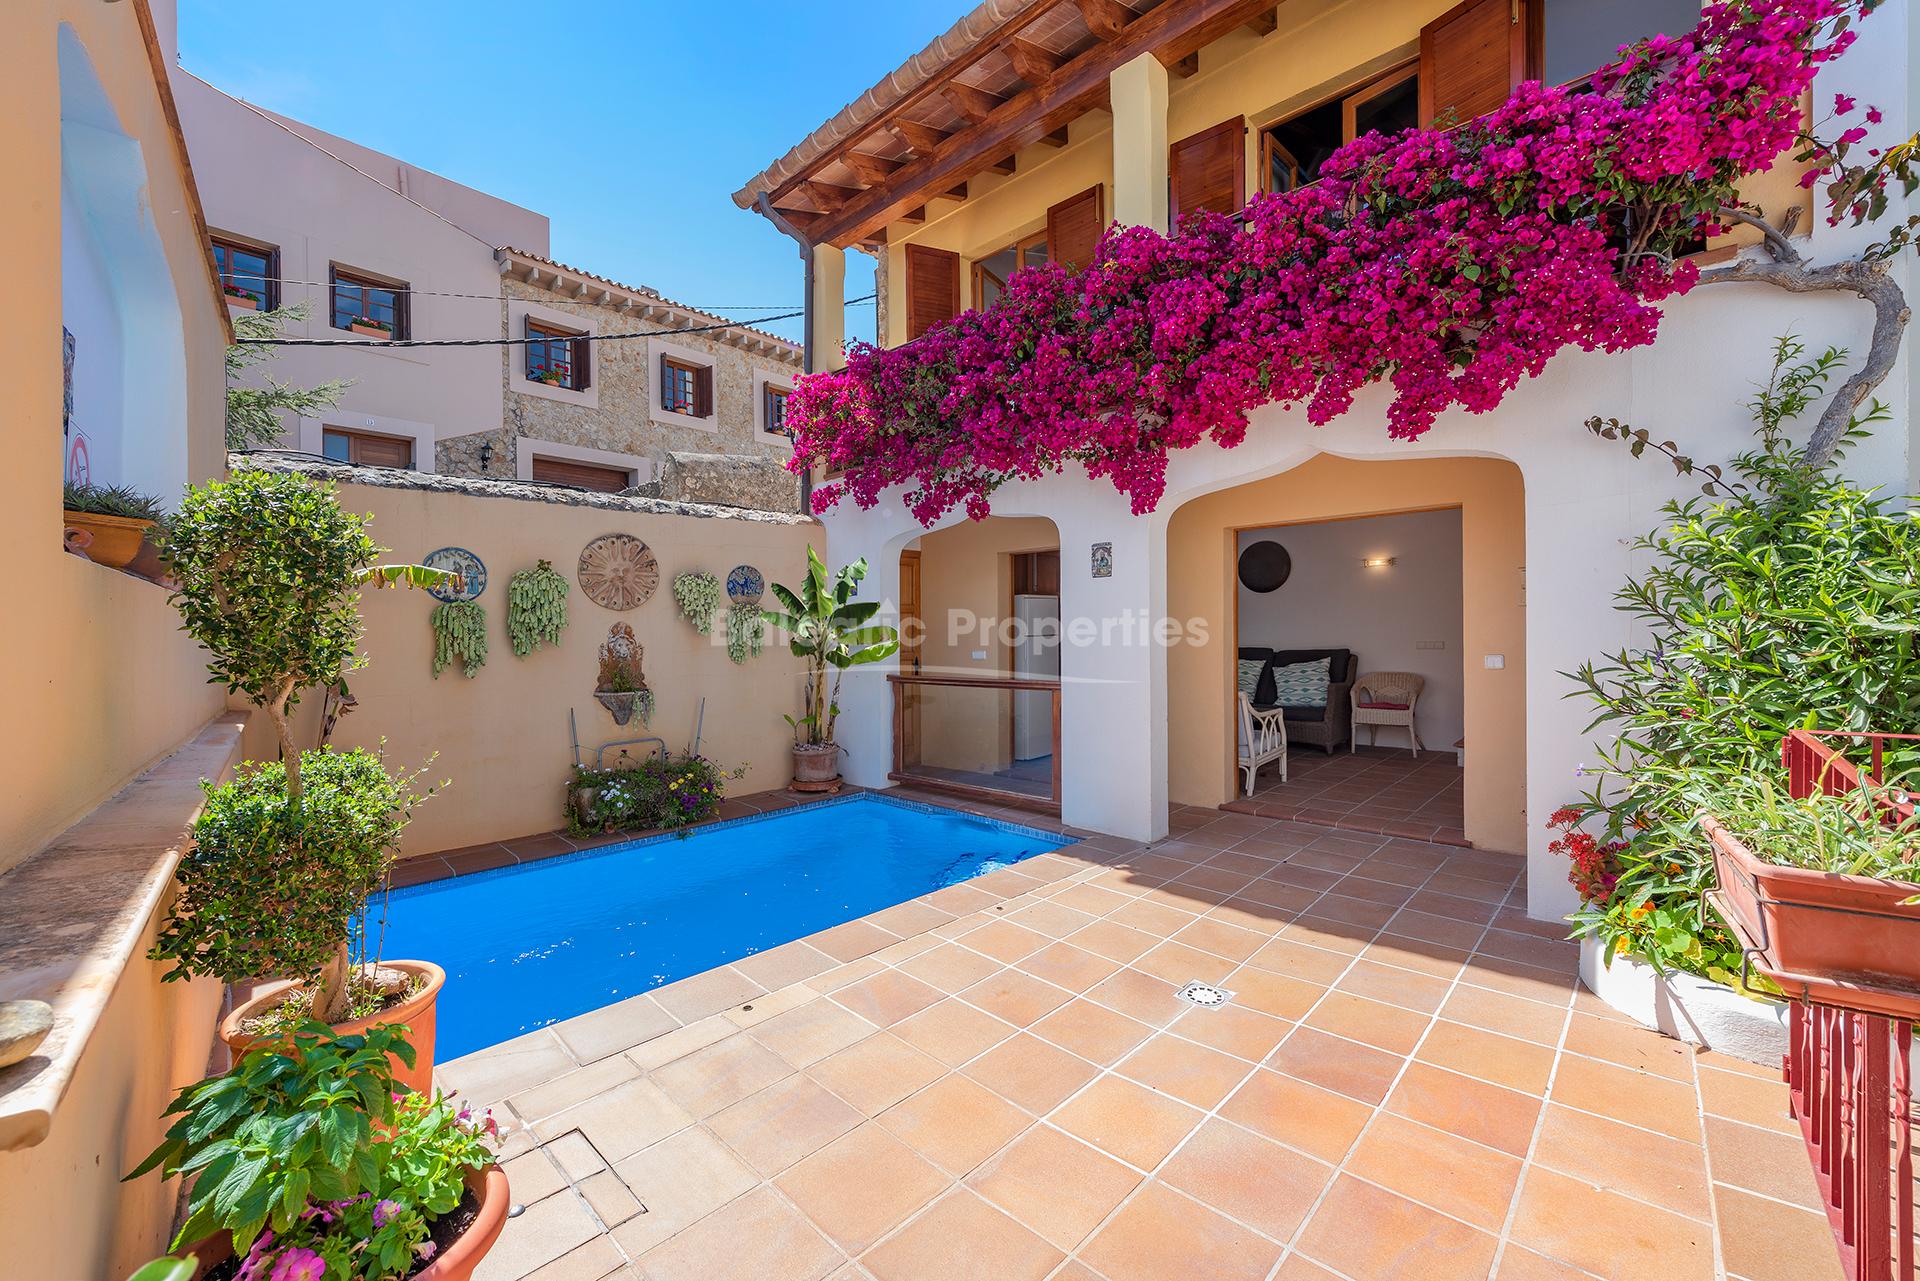 Unique traditional town house with private pool for sale in Pollensa, Mallorca